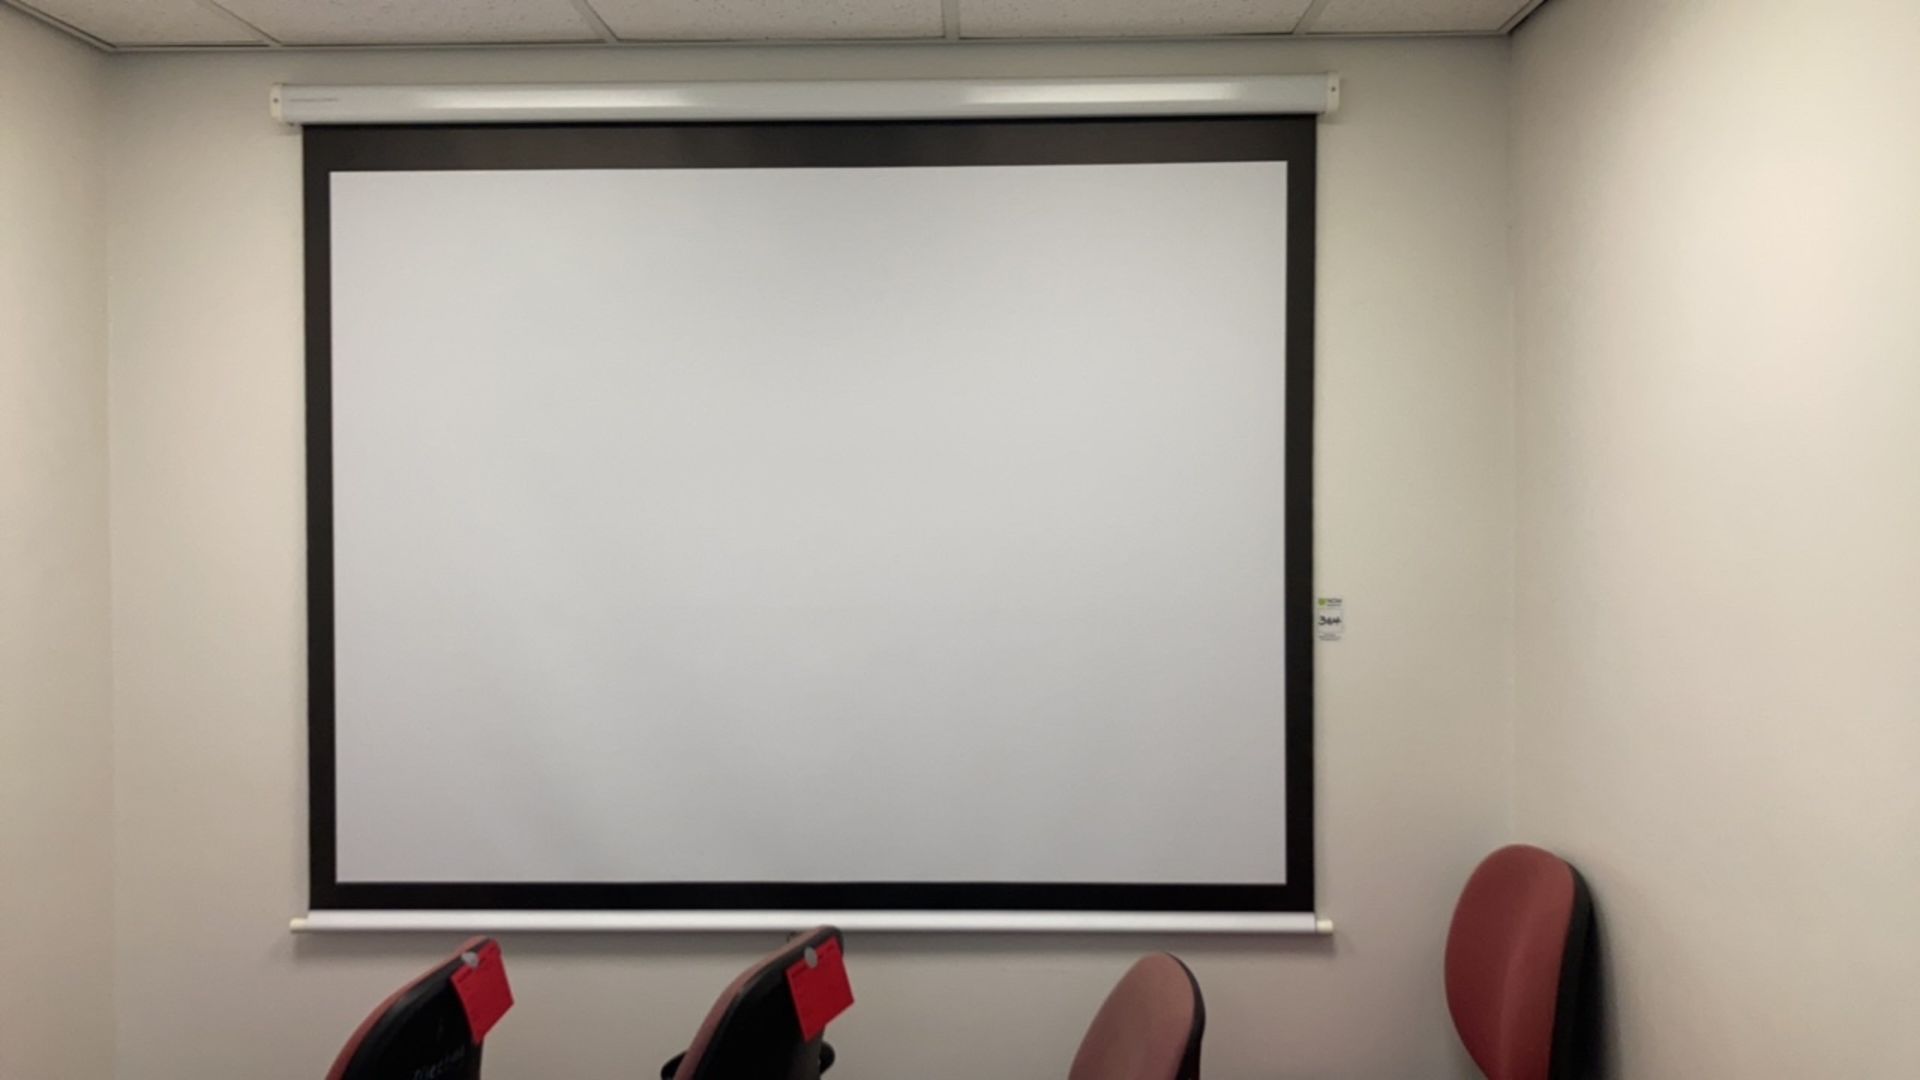 Projector and screen - Image 3 of 3